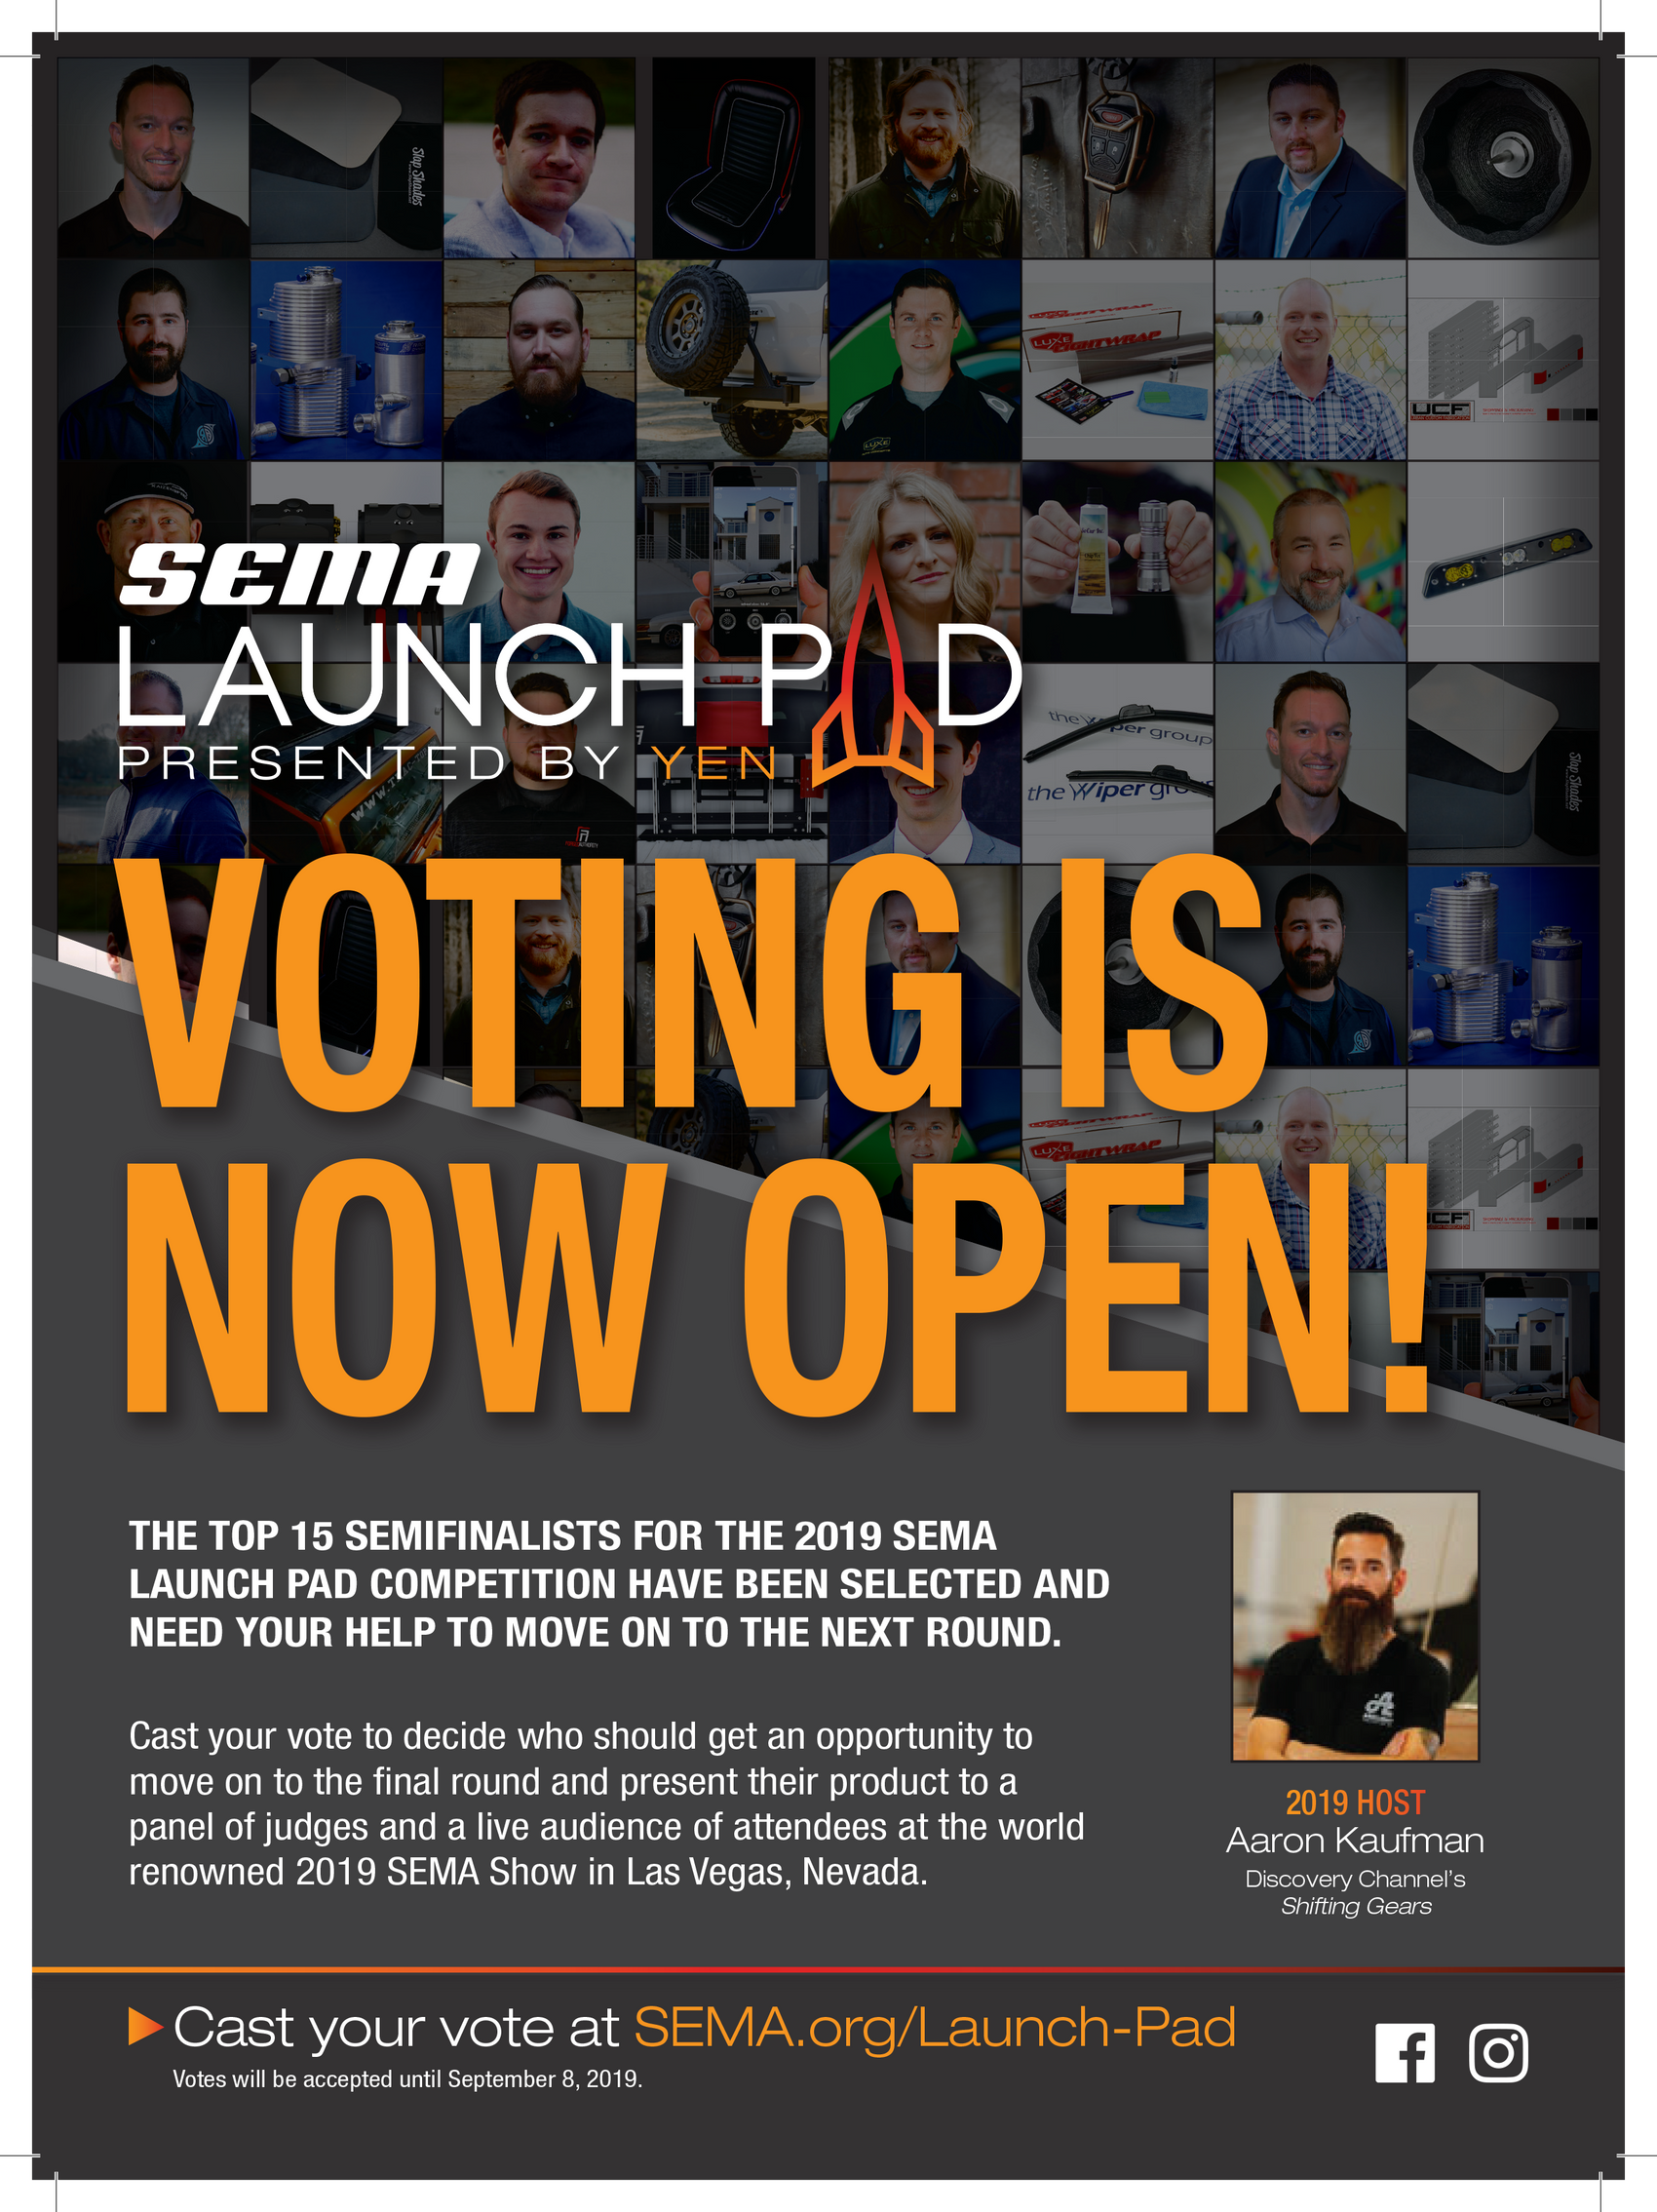 We need your vote for SEMA Launchpad!